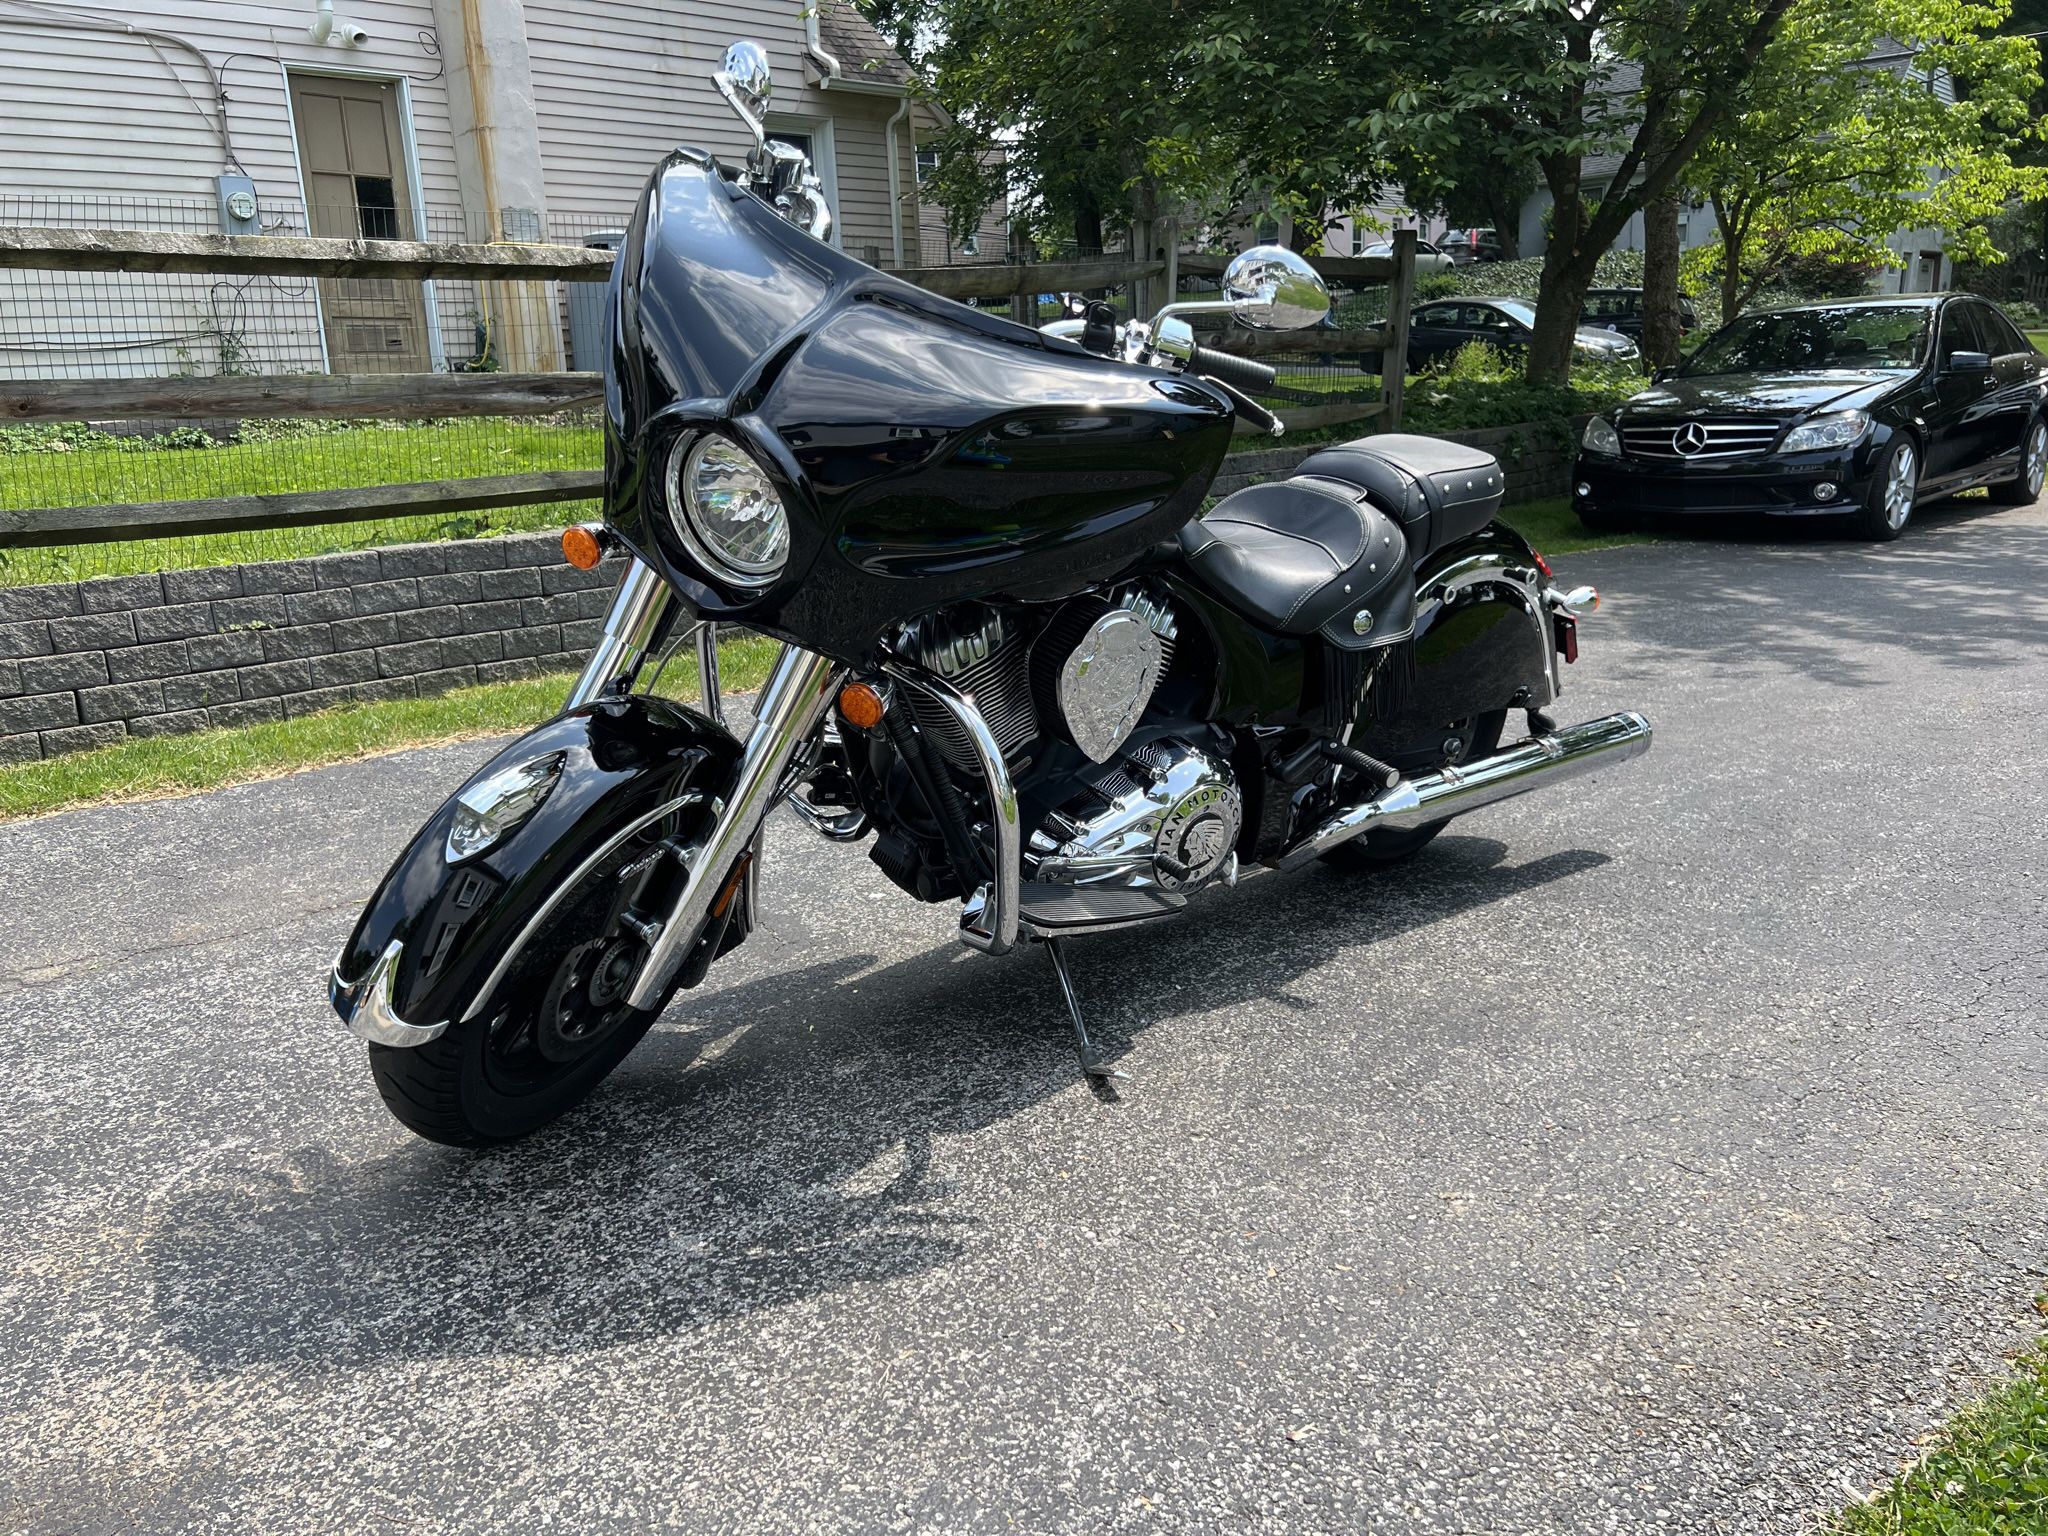 2018 Indian Chief